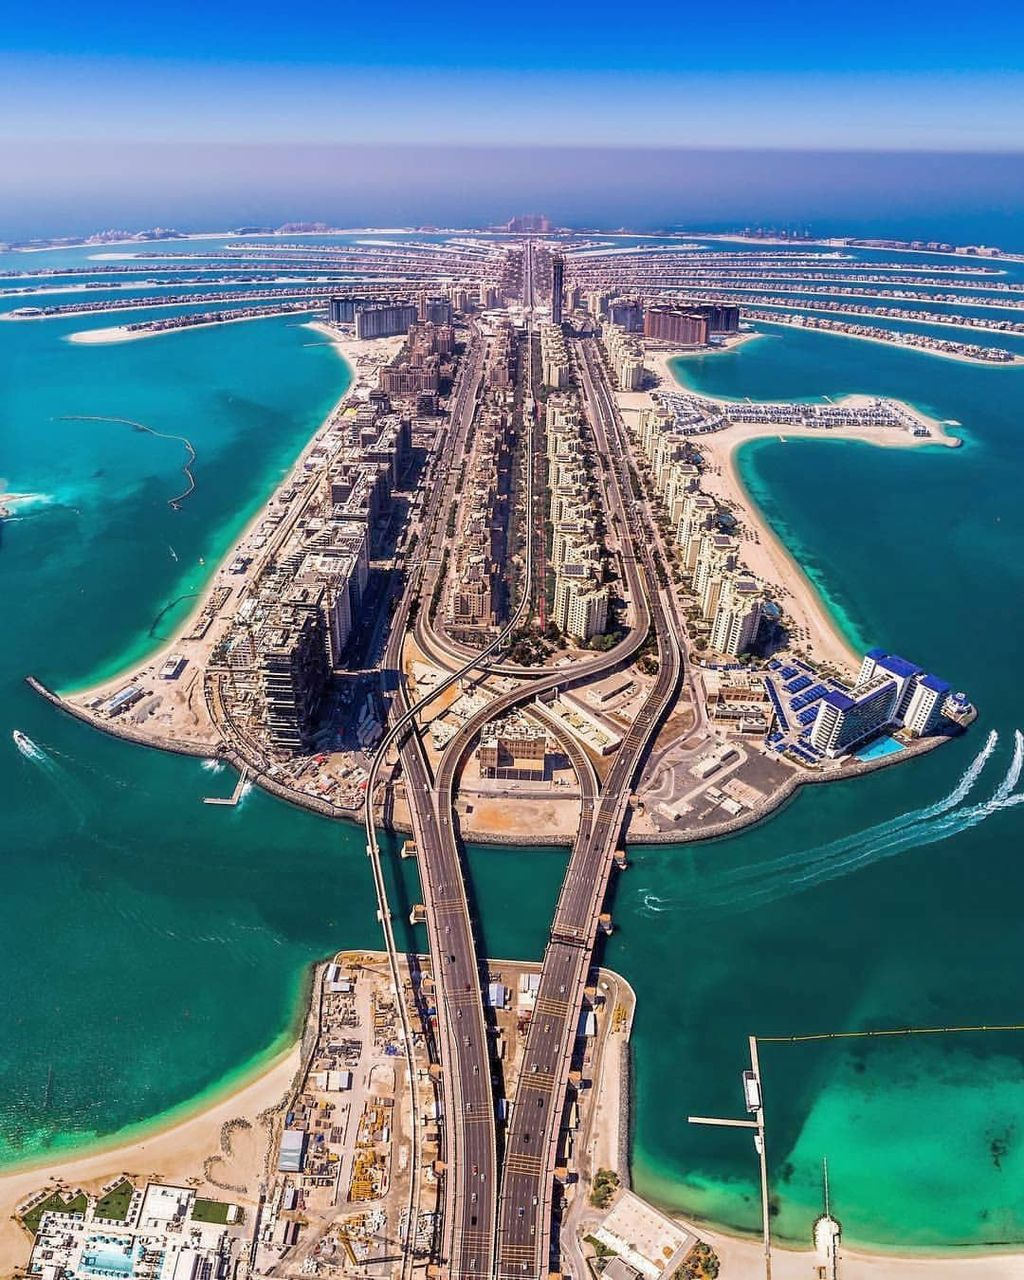 Awesome Photos Of Dubai To Make You Want To Visit It15